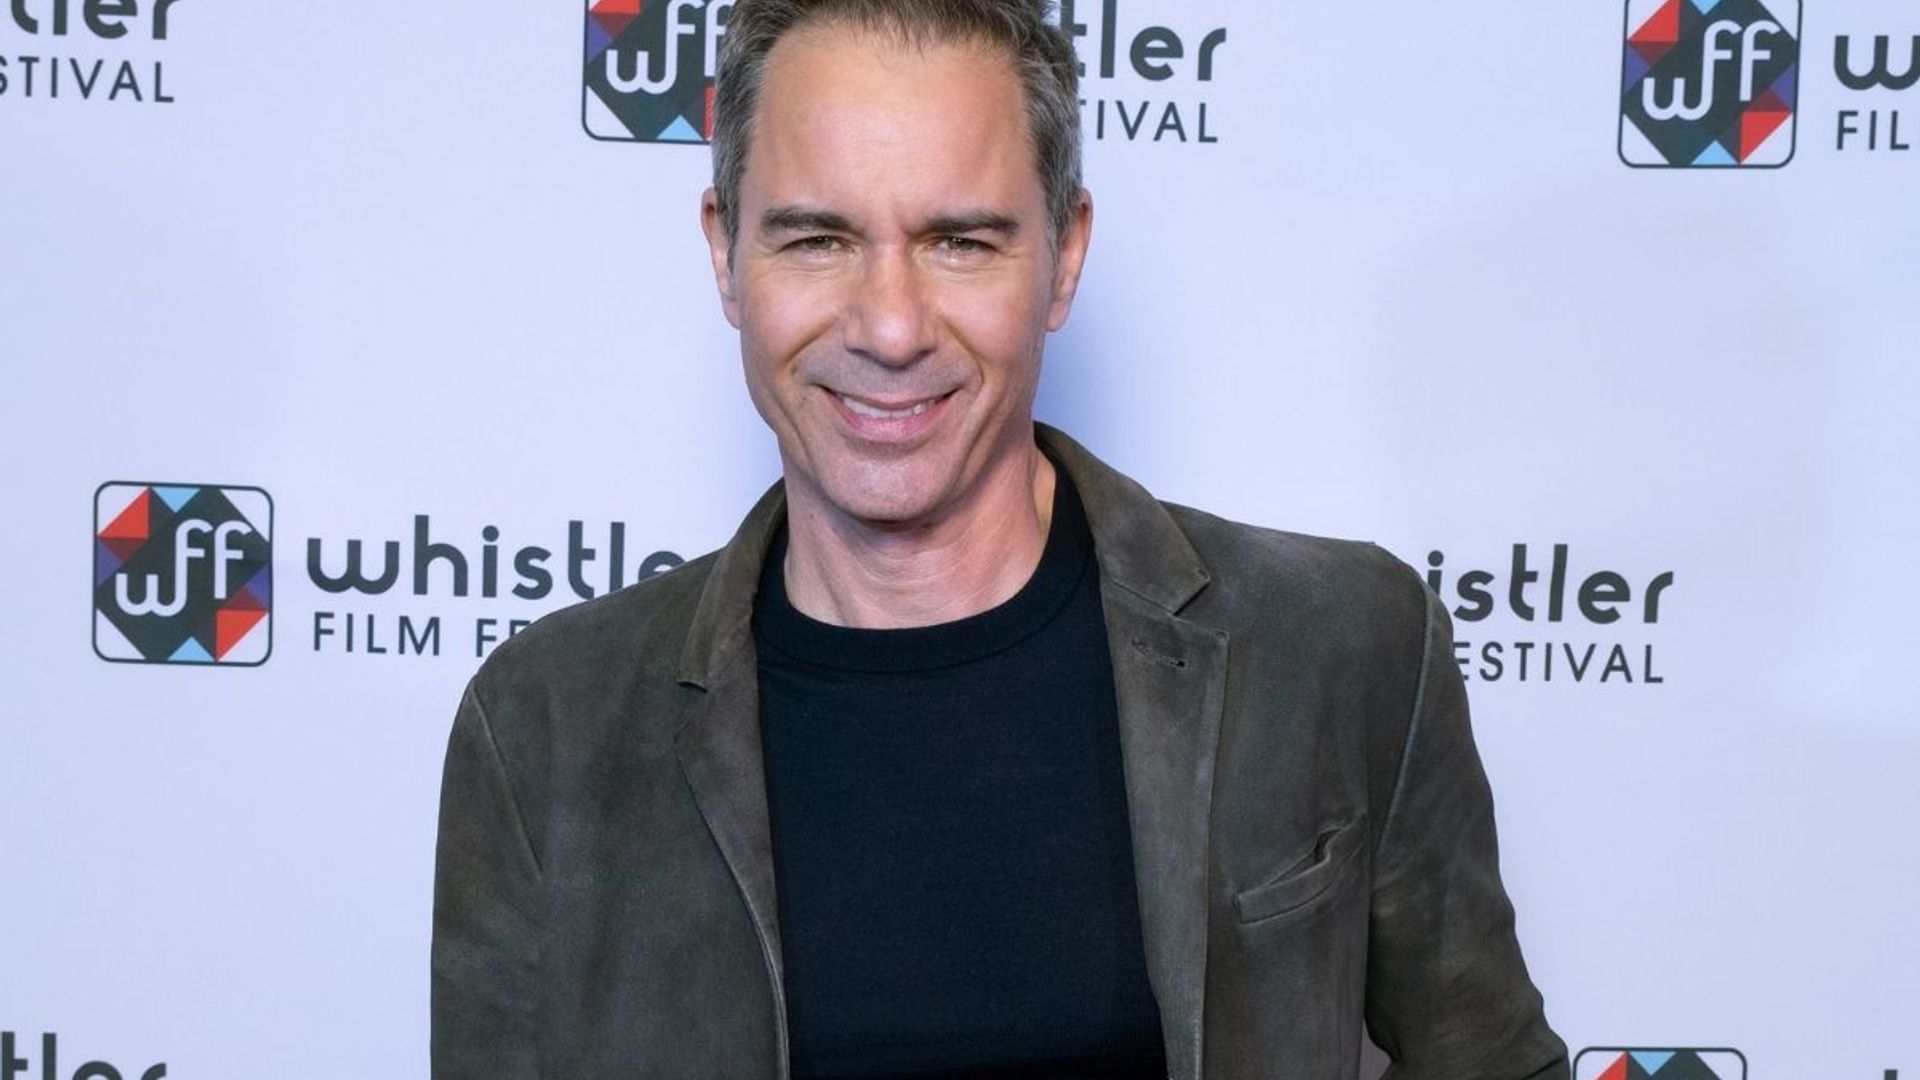 Exclusive: Eric McCormack shares how 'Will & Grace' changed TV as he receives a special award and his new film premieres